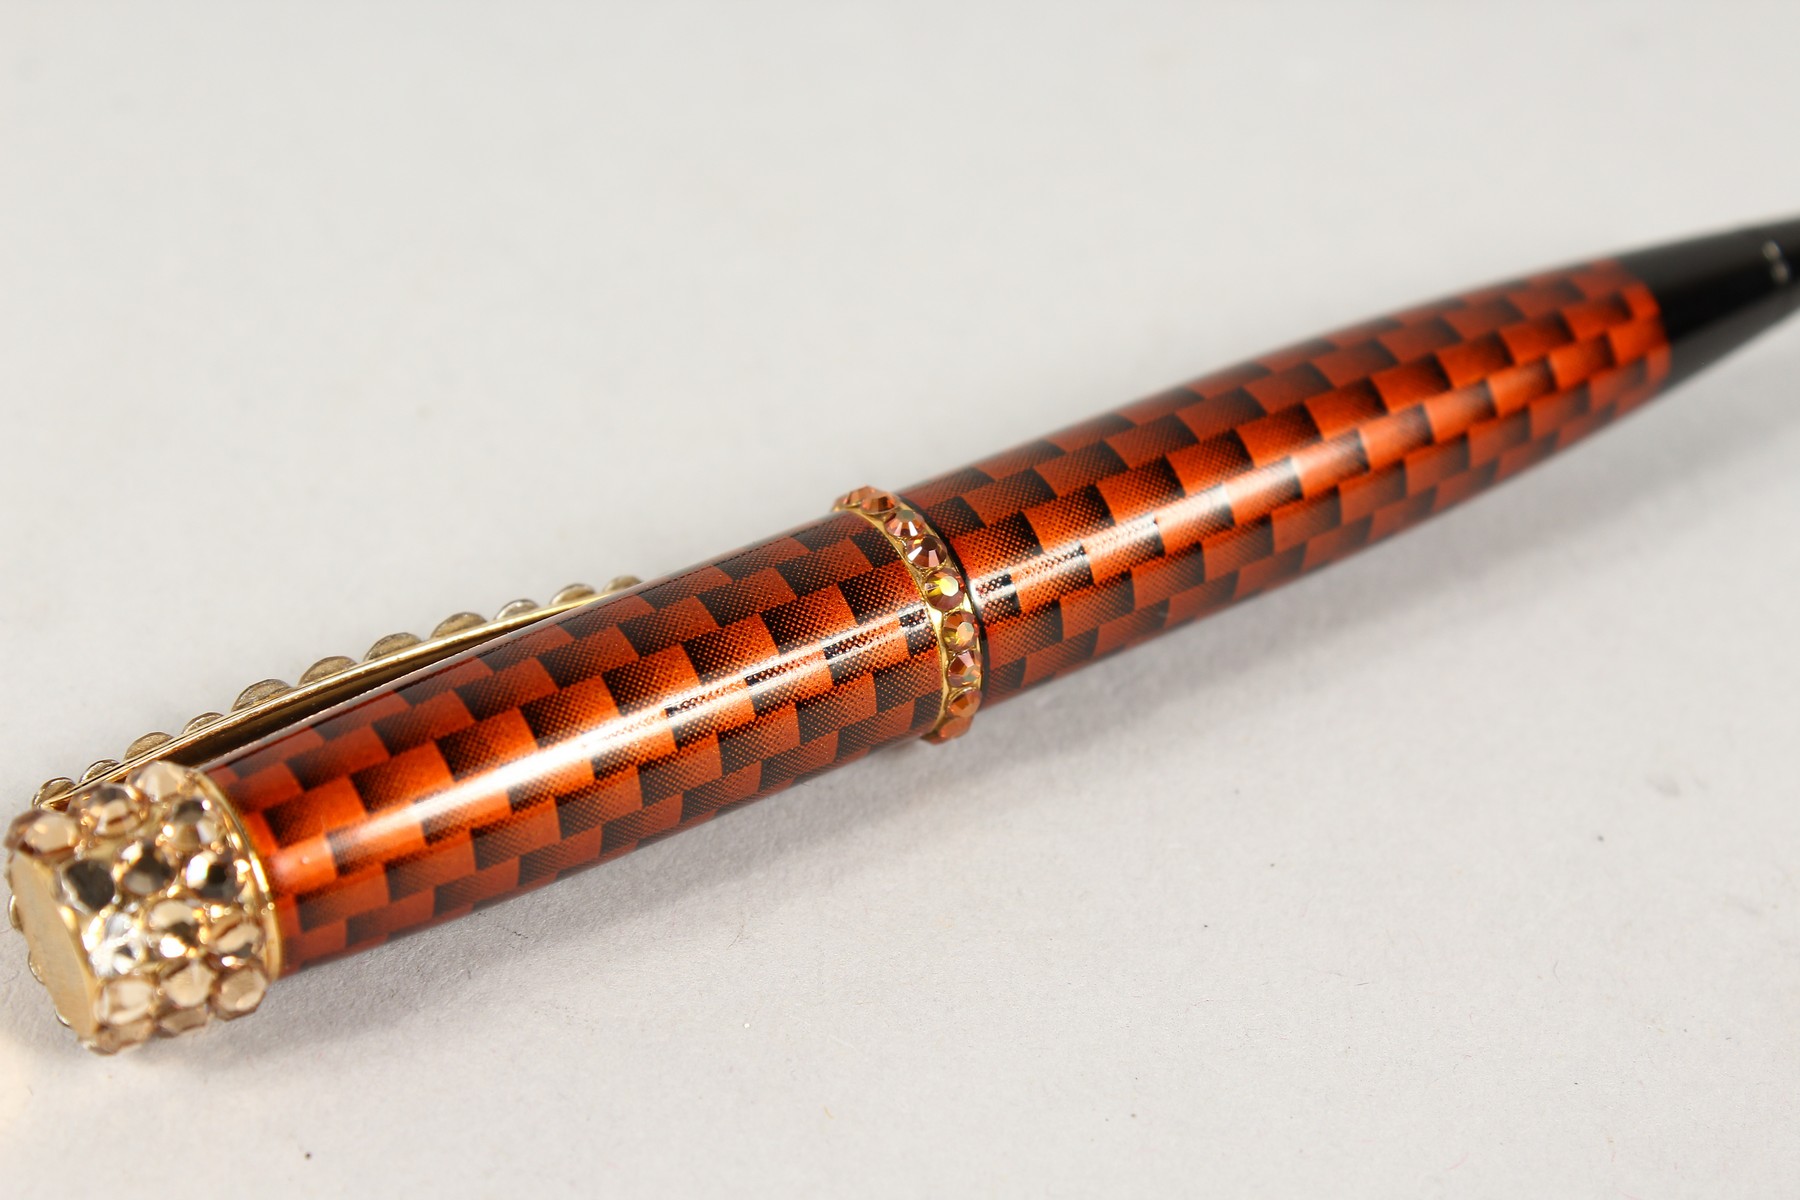 A JIMMY CRYSTAL PEN in a velvet sleeve. - Image 2 of 3